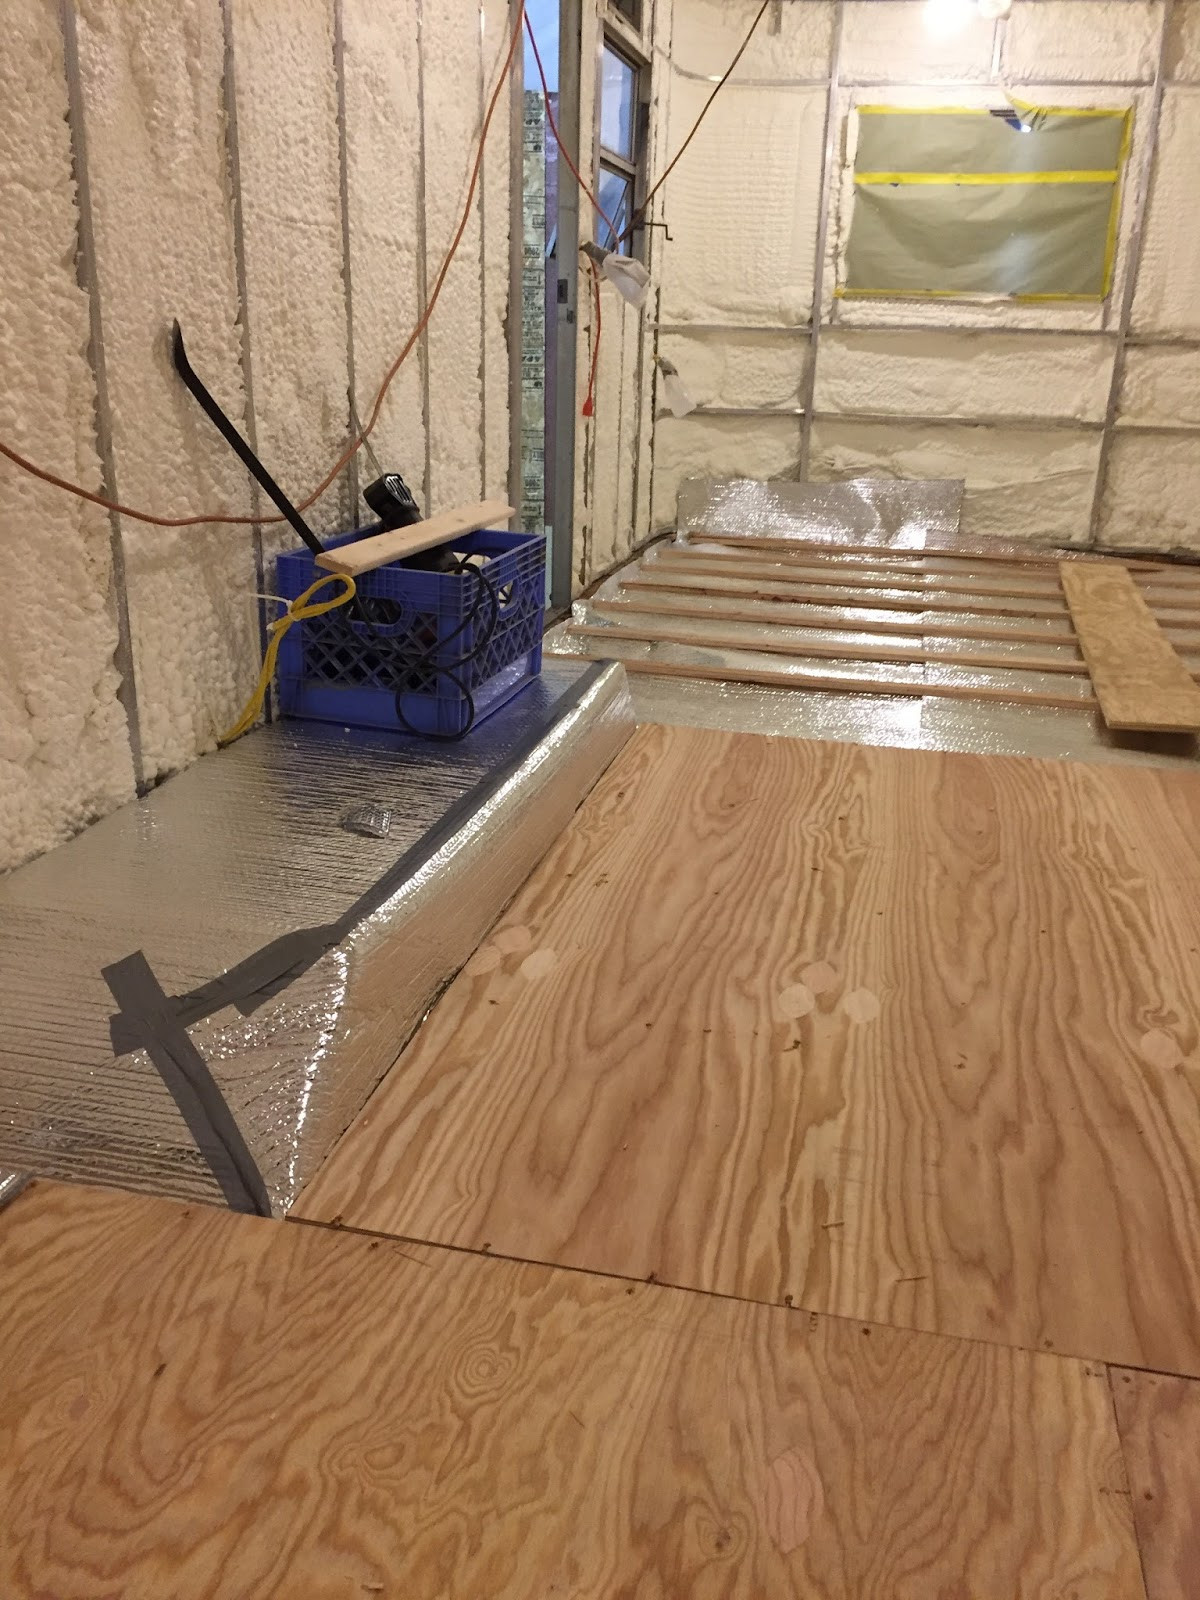 11 Stylish 3 4 Hardwood Floor Nailer 2024 free download 3 4 hardwood floor nailer of day 8 insulating the floor and subfloor install 1958 spartan in for the sub i used 3 4 fir ac and used a combination of 1 1 4 exterior decking screws into the na